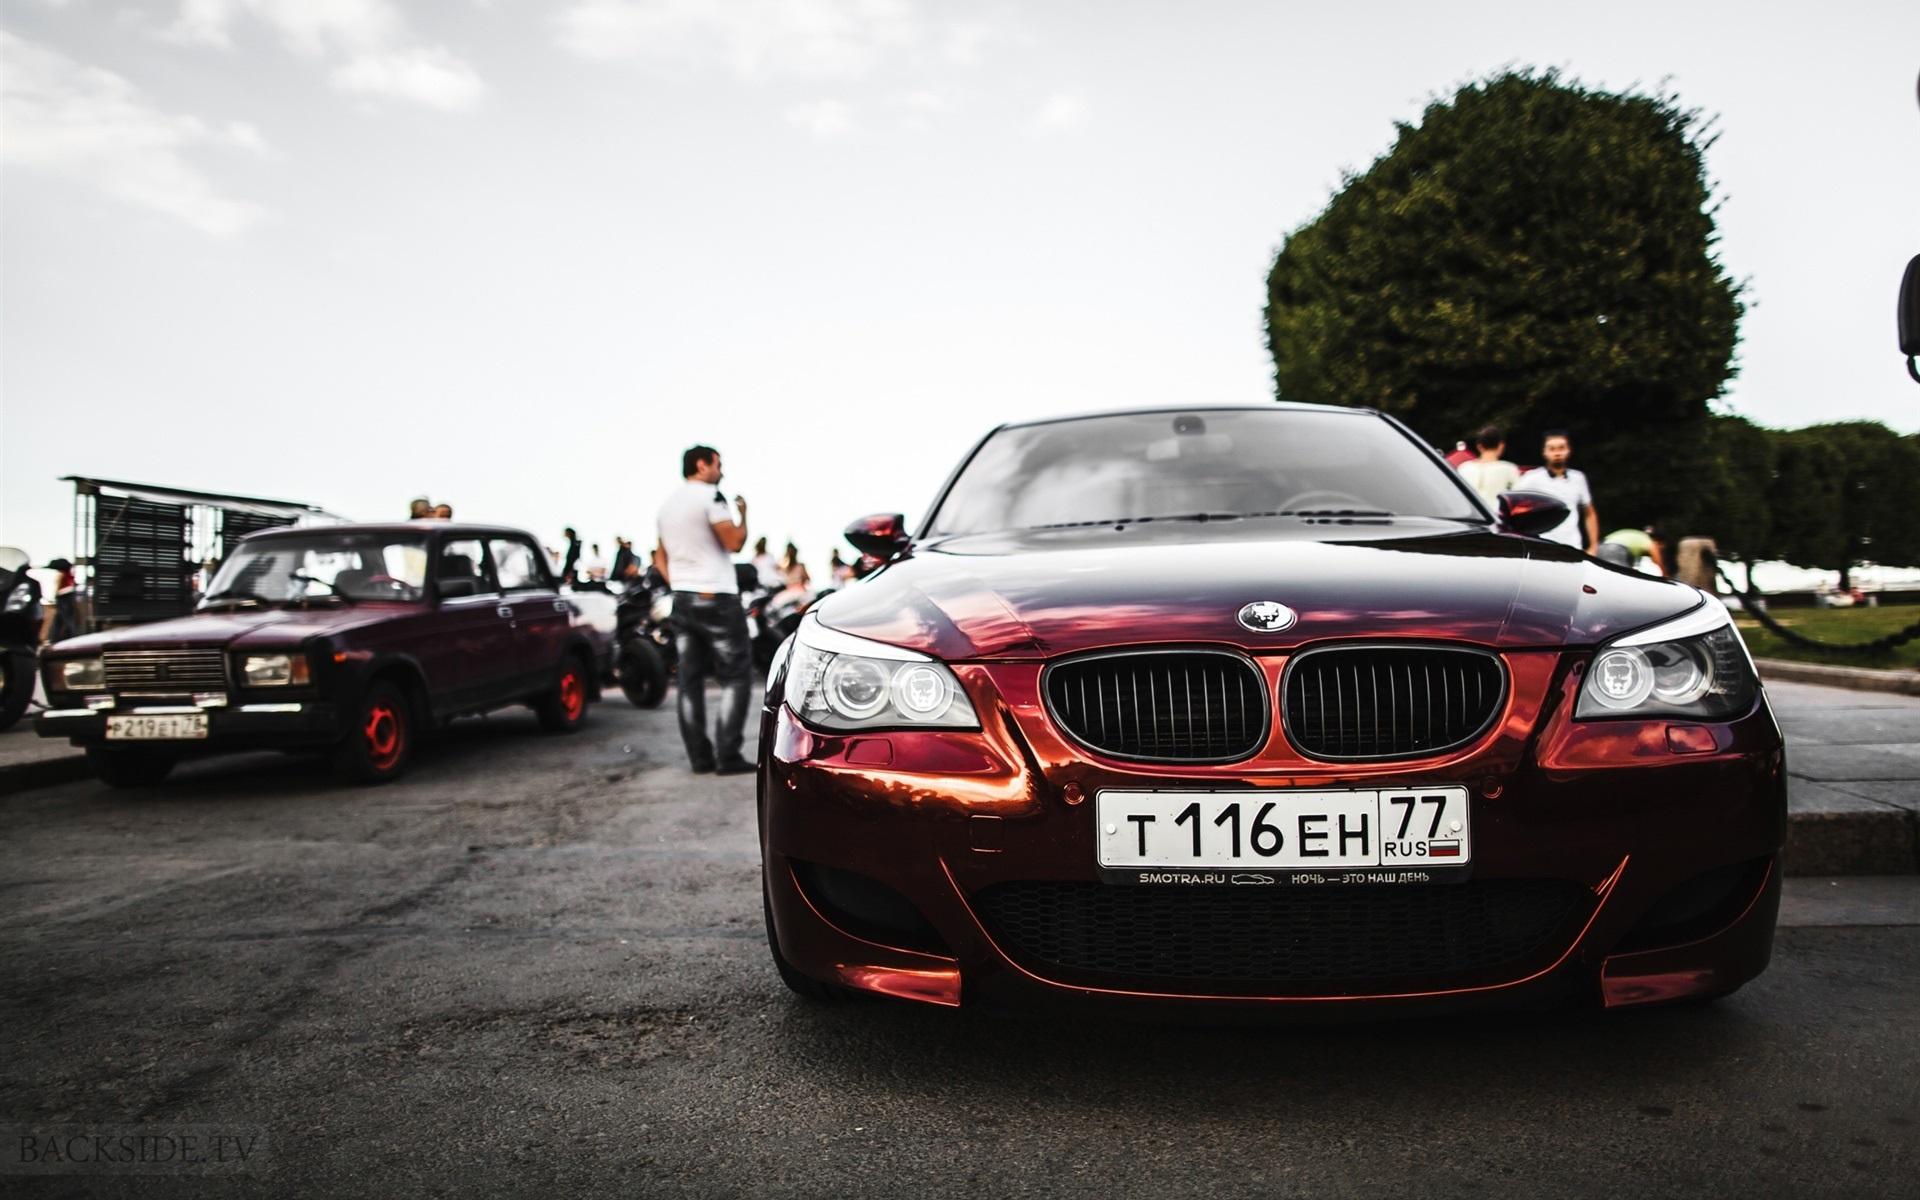 Wallpaper BMW E60 red car front view 1920x1200 HD Picture, Image